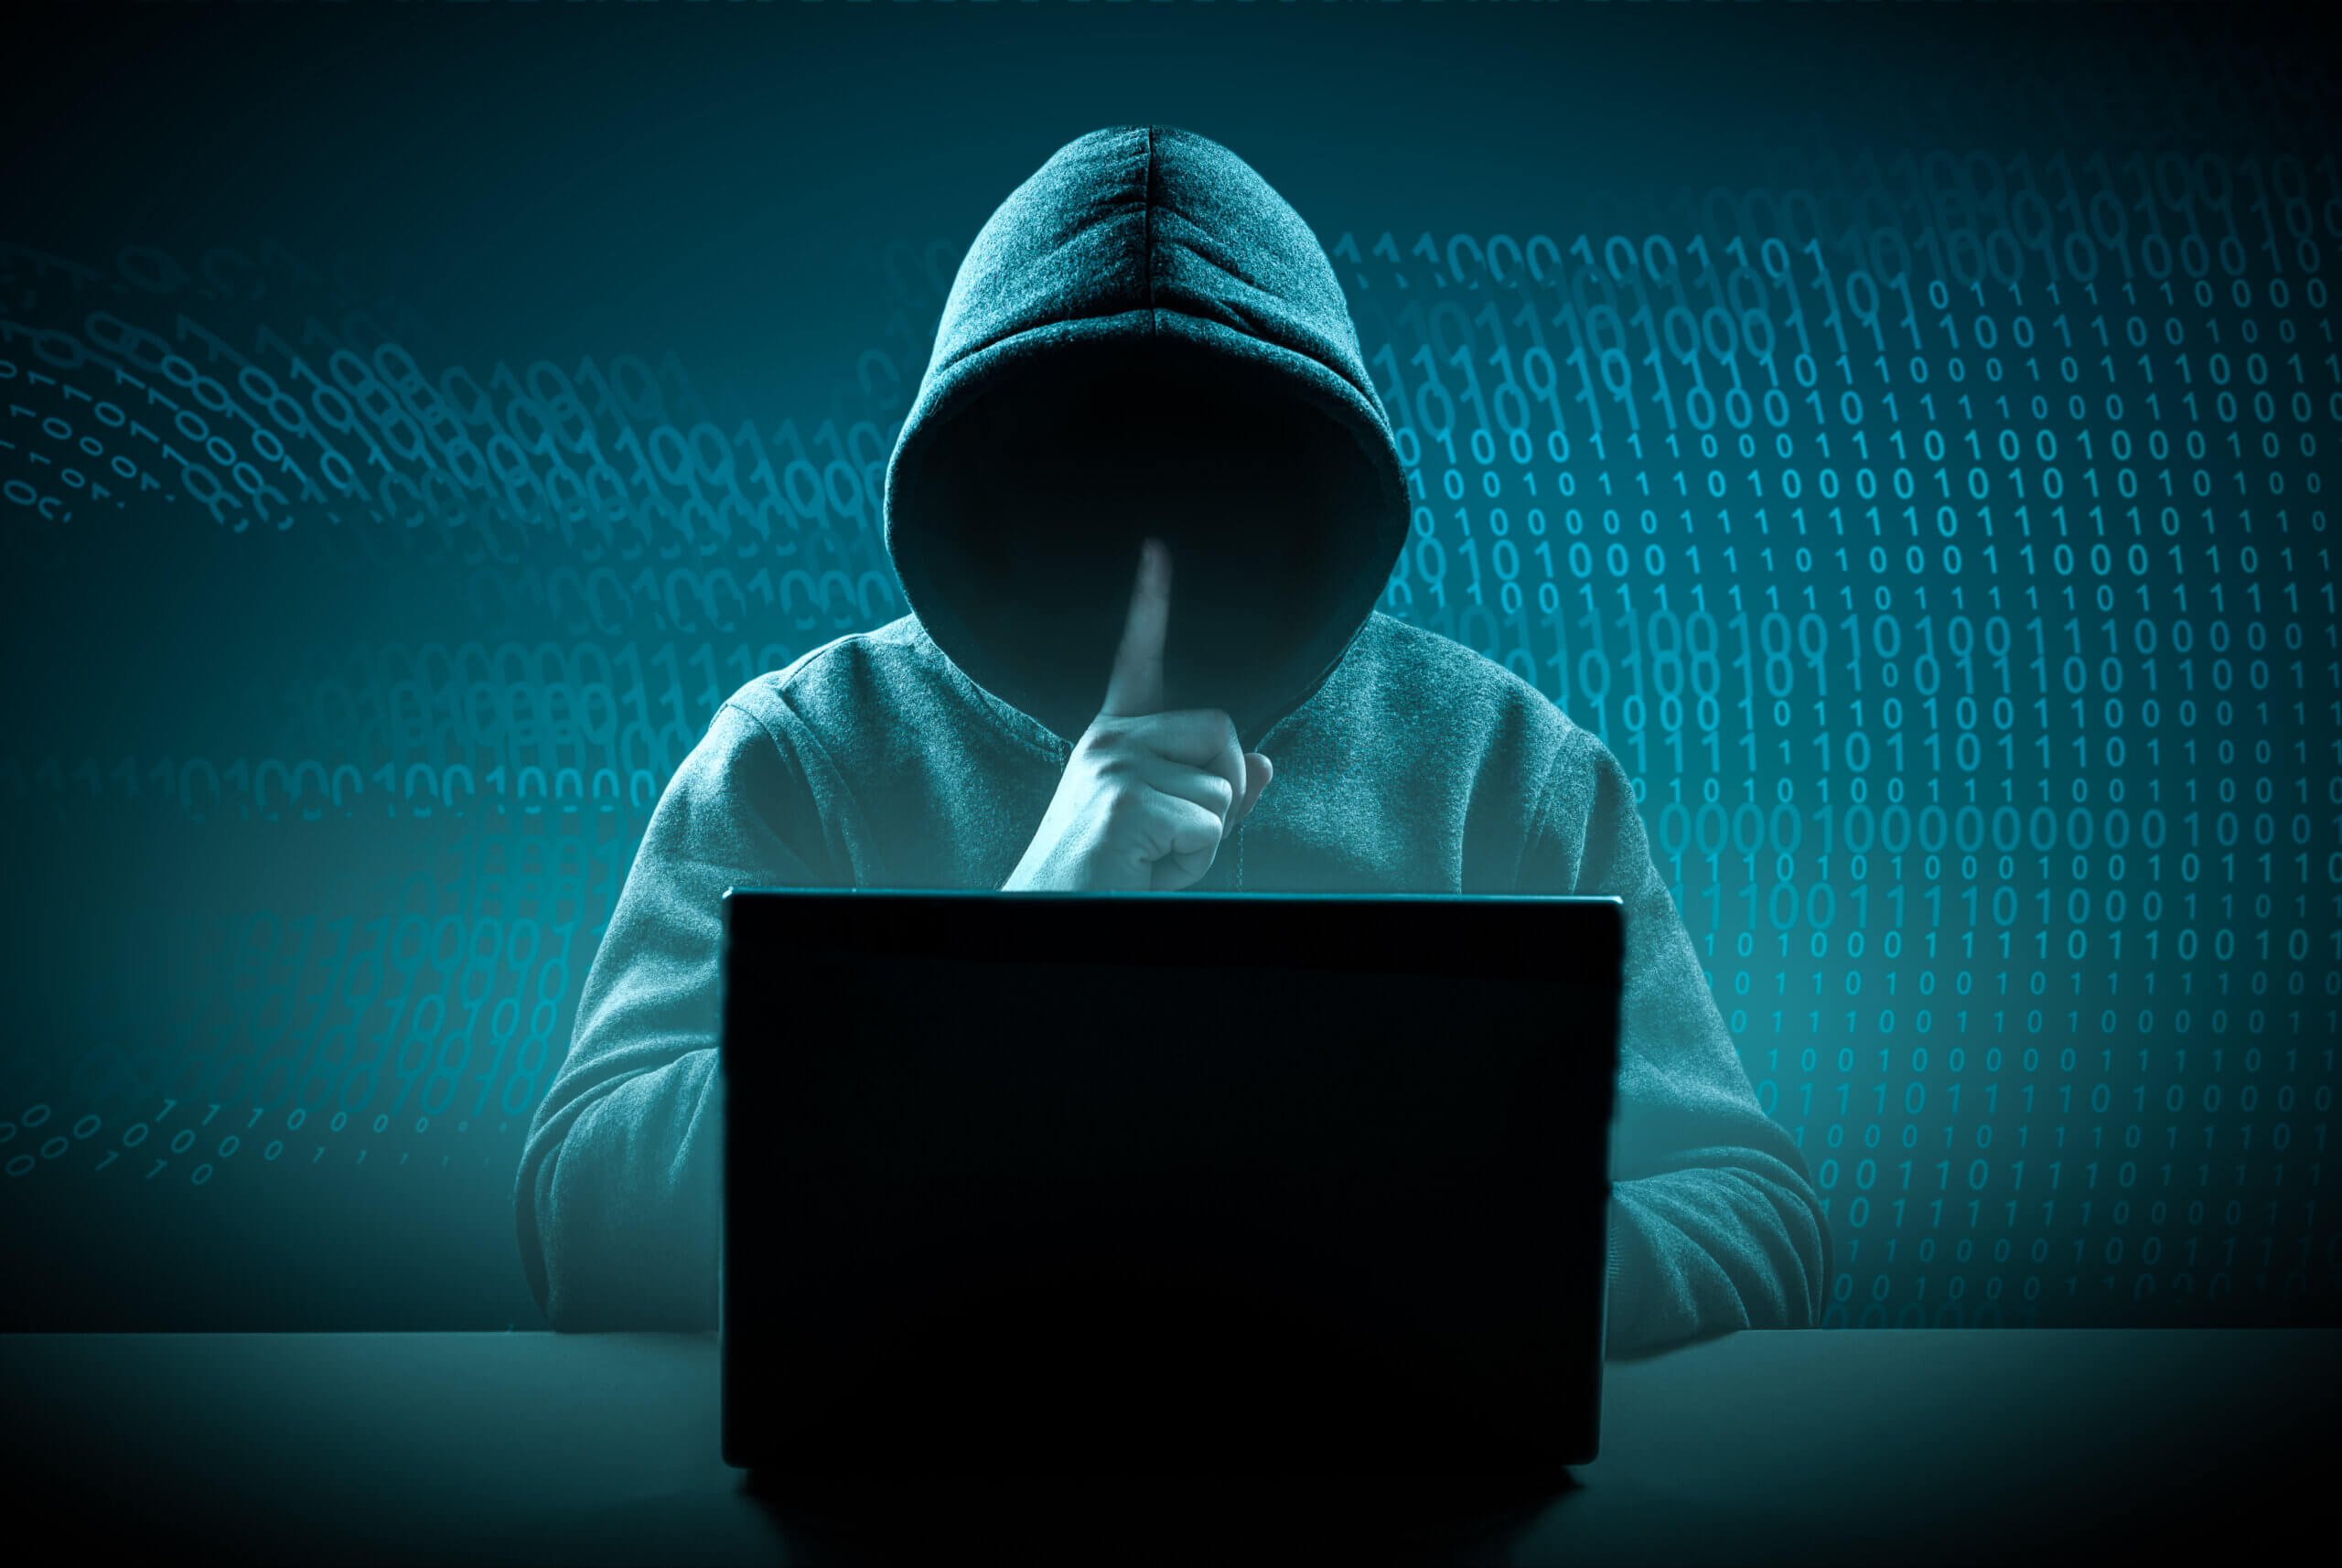 Cybersecurity, computer hacker with hoodie.